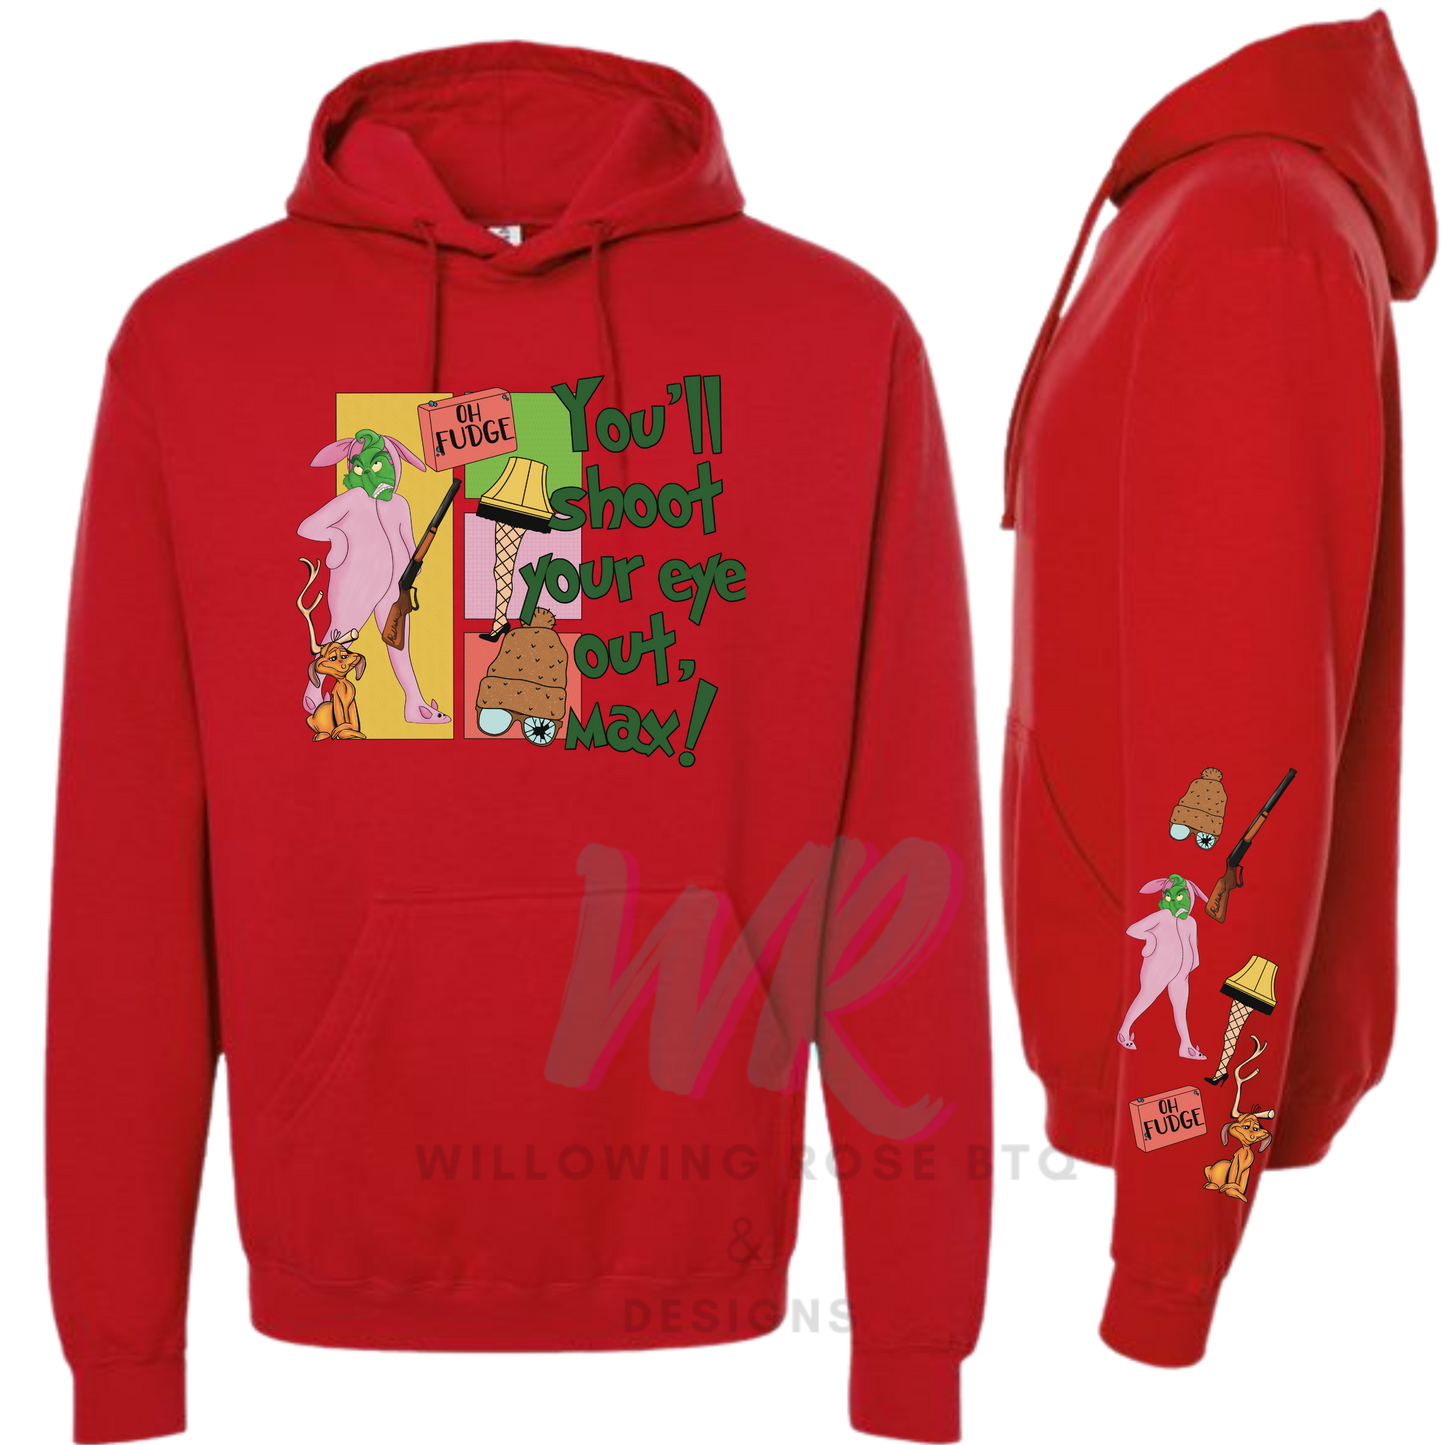 You'll shoot your eye out max hoodie